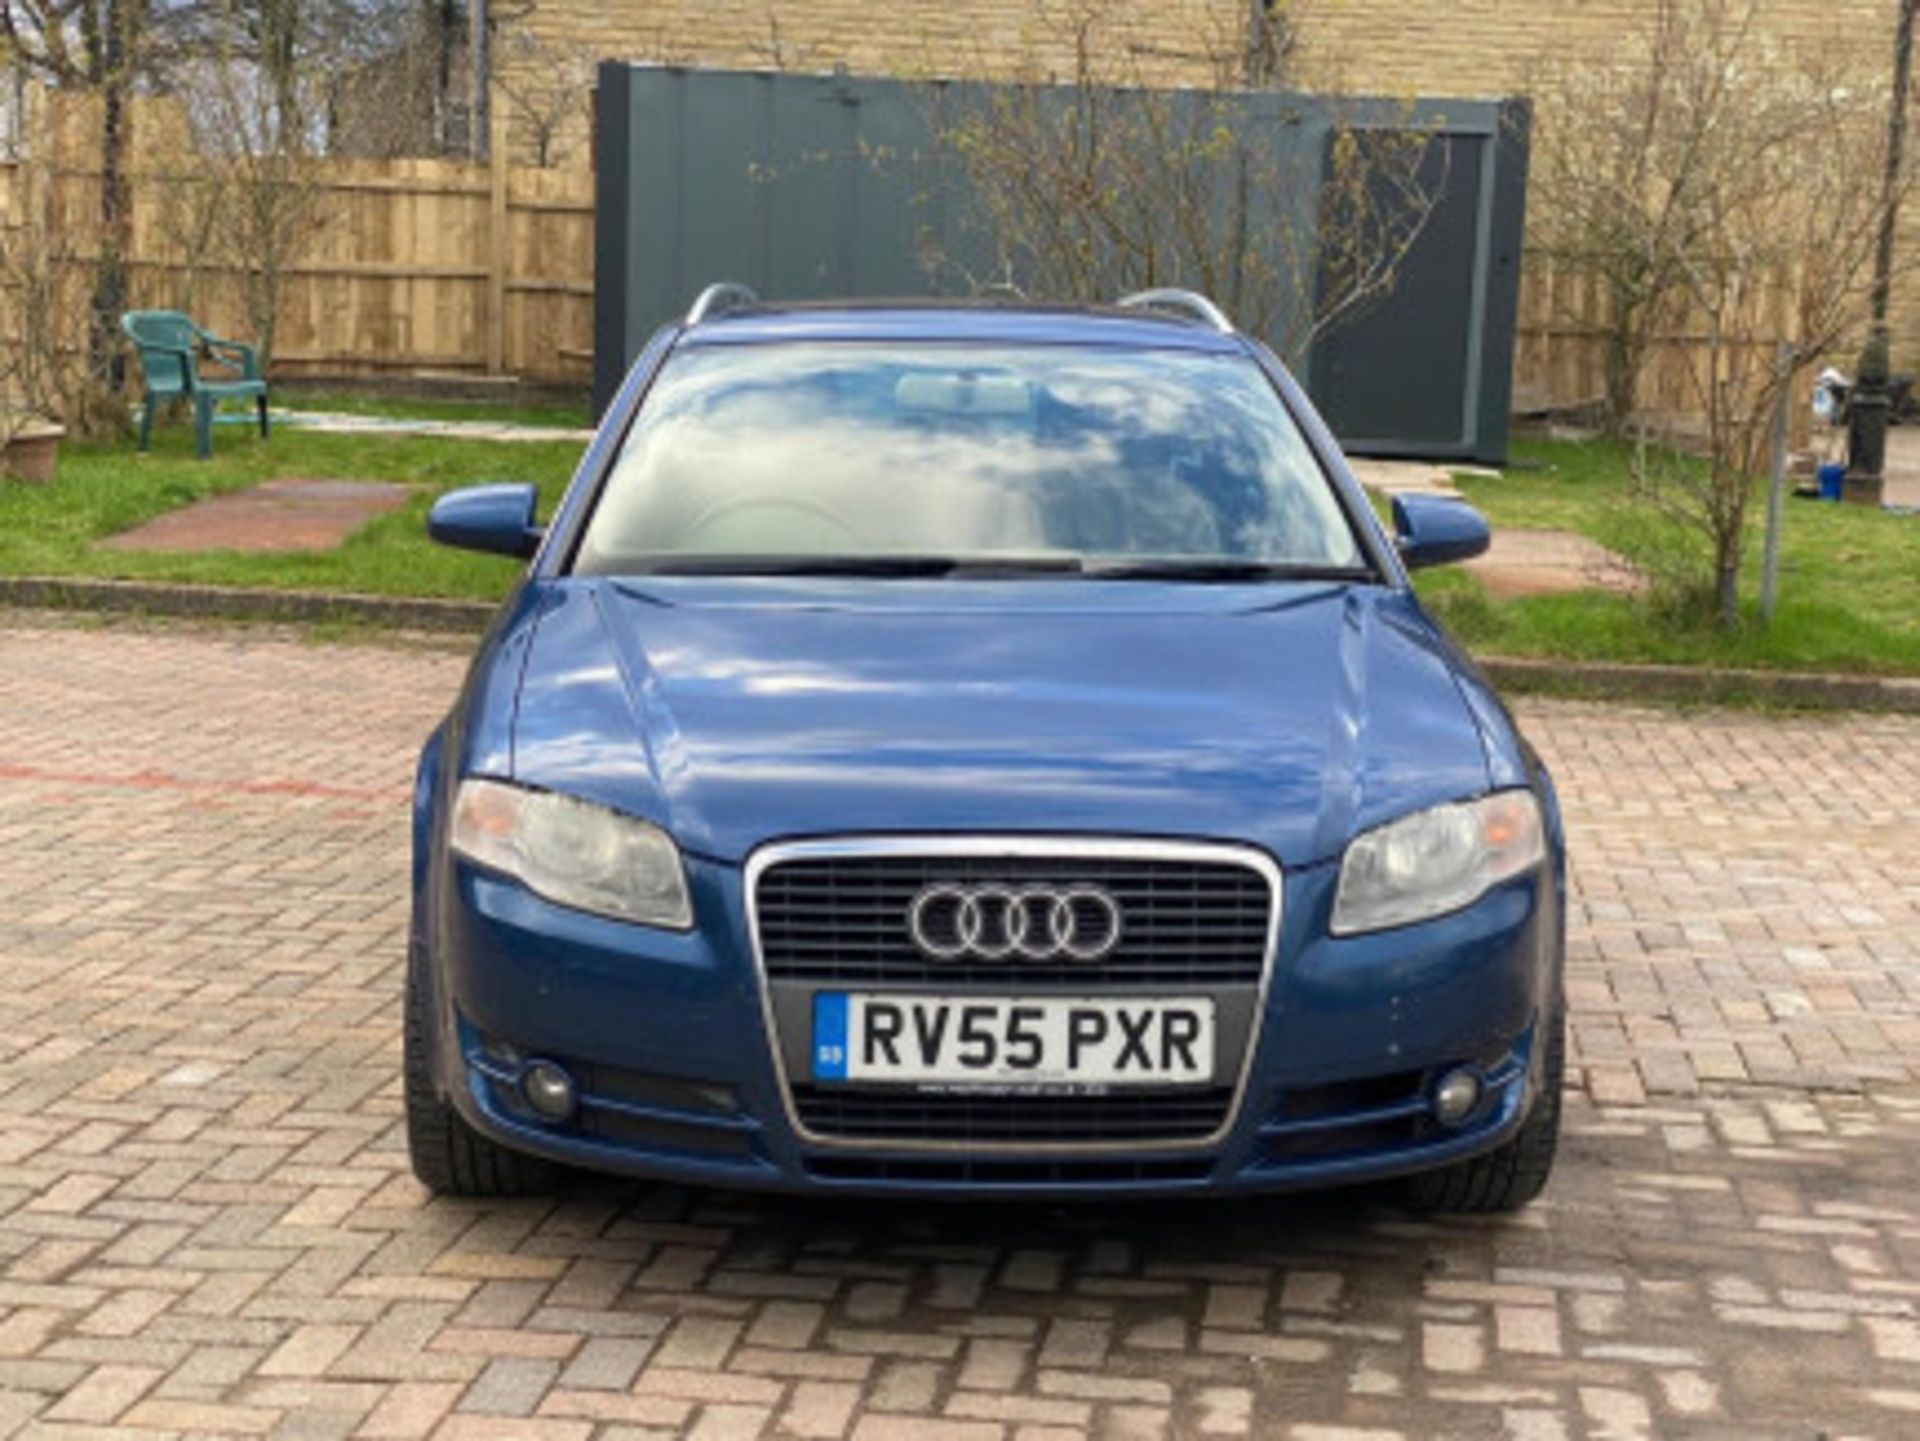 AUDI A4 AVANT 1.9 TDI SE 5DR ESTATE - RARE AND RELIABLE LUXURY WAGON >>--NO VAT ON HAMMER--<< - Image 41 of 97